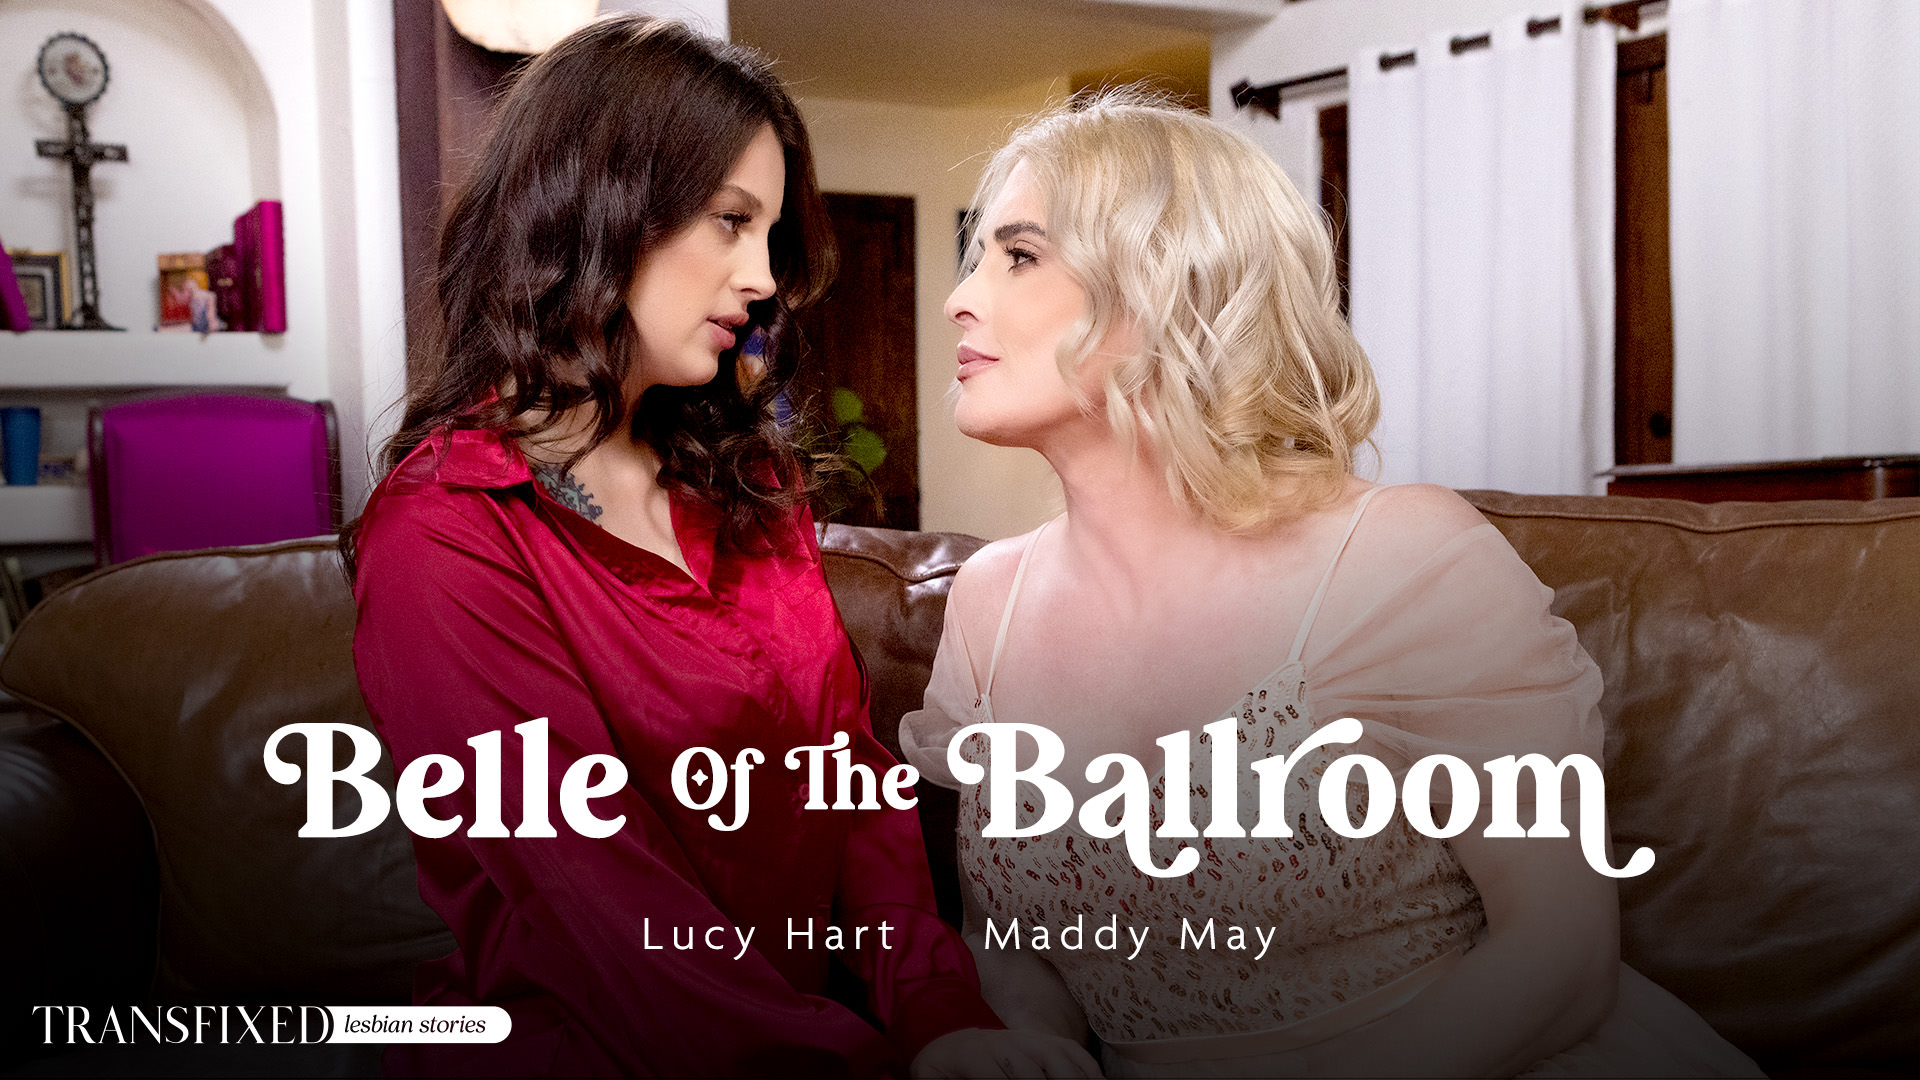 Transfixed &#8211; Maddy May And Lucy Hart &#8211; Belle Of The Ballroom, Perverzija.com